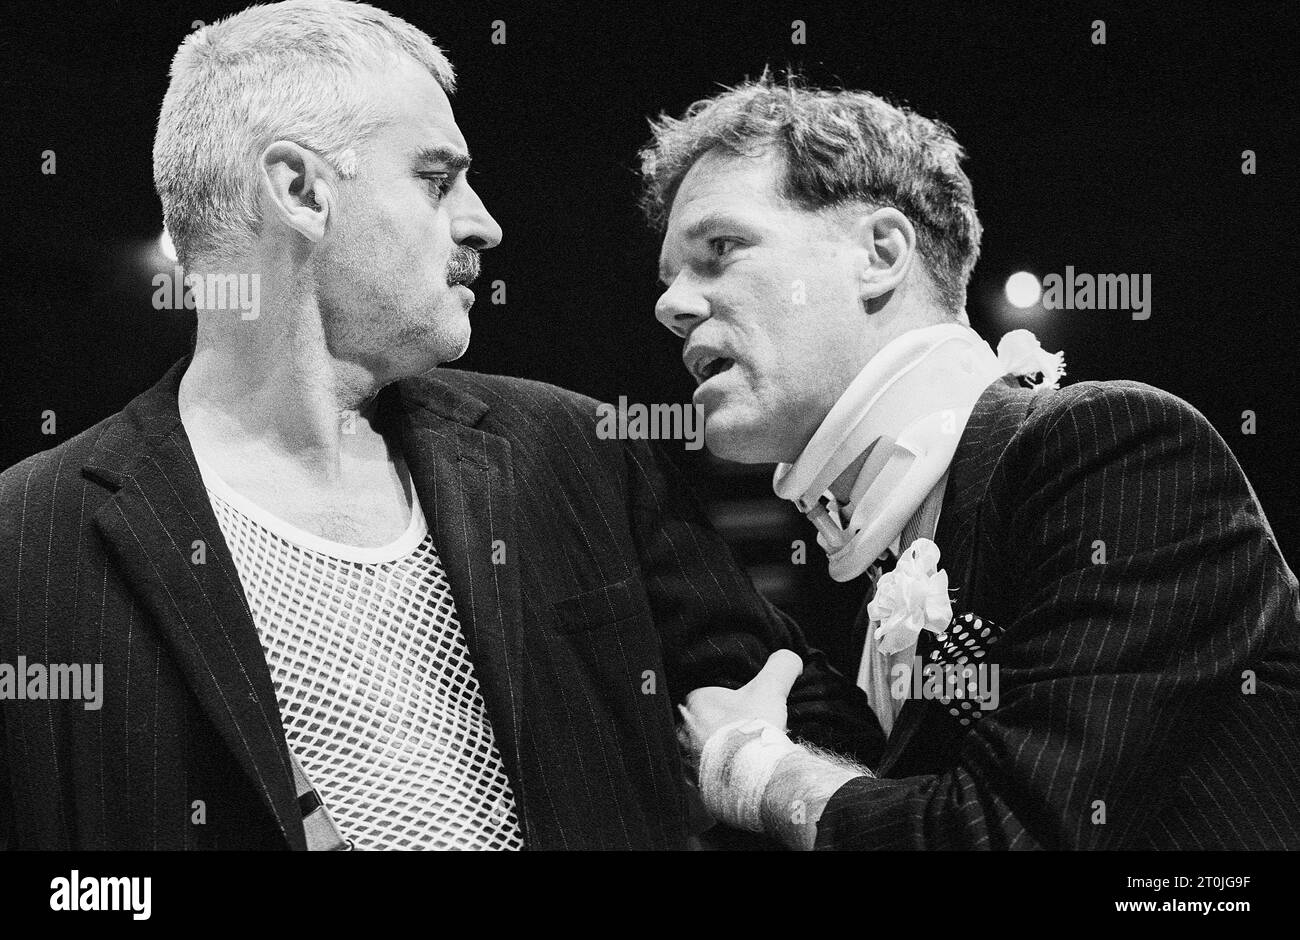 l-r: Dudley Stevens (Clegg), Loudon Wainwright III (Worsely) in OWNERS by Caryl Churchill at the Young Vic, London SE1 06/04/1987 Design: Mark Thompson Beleuchtung: Paul Denby Regie: Annie Castledine Stockfoto